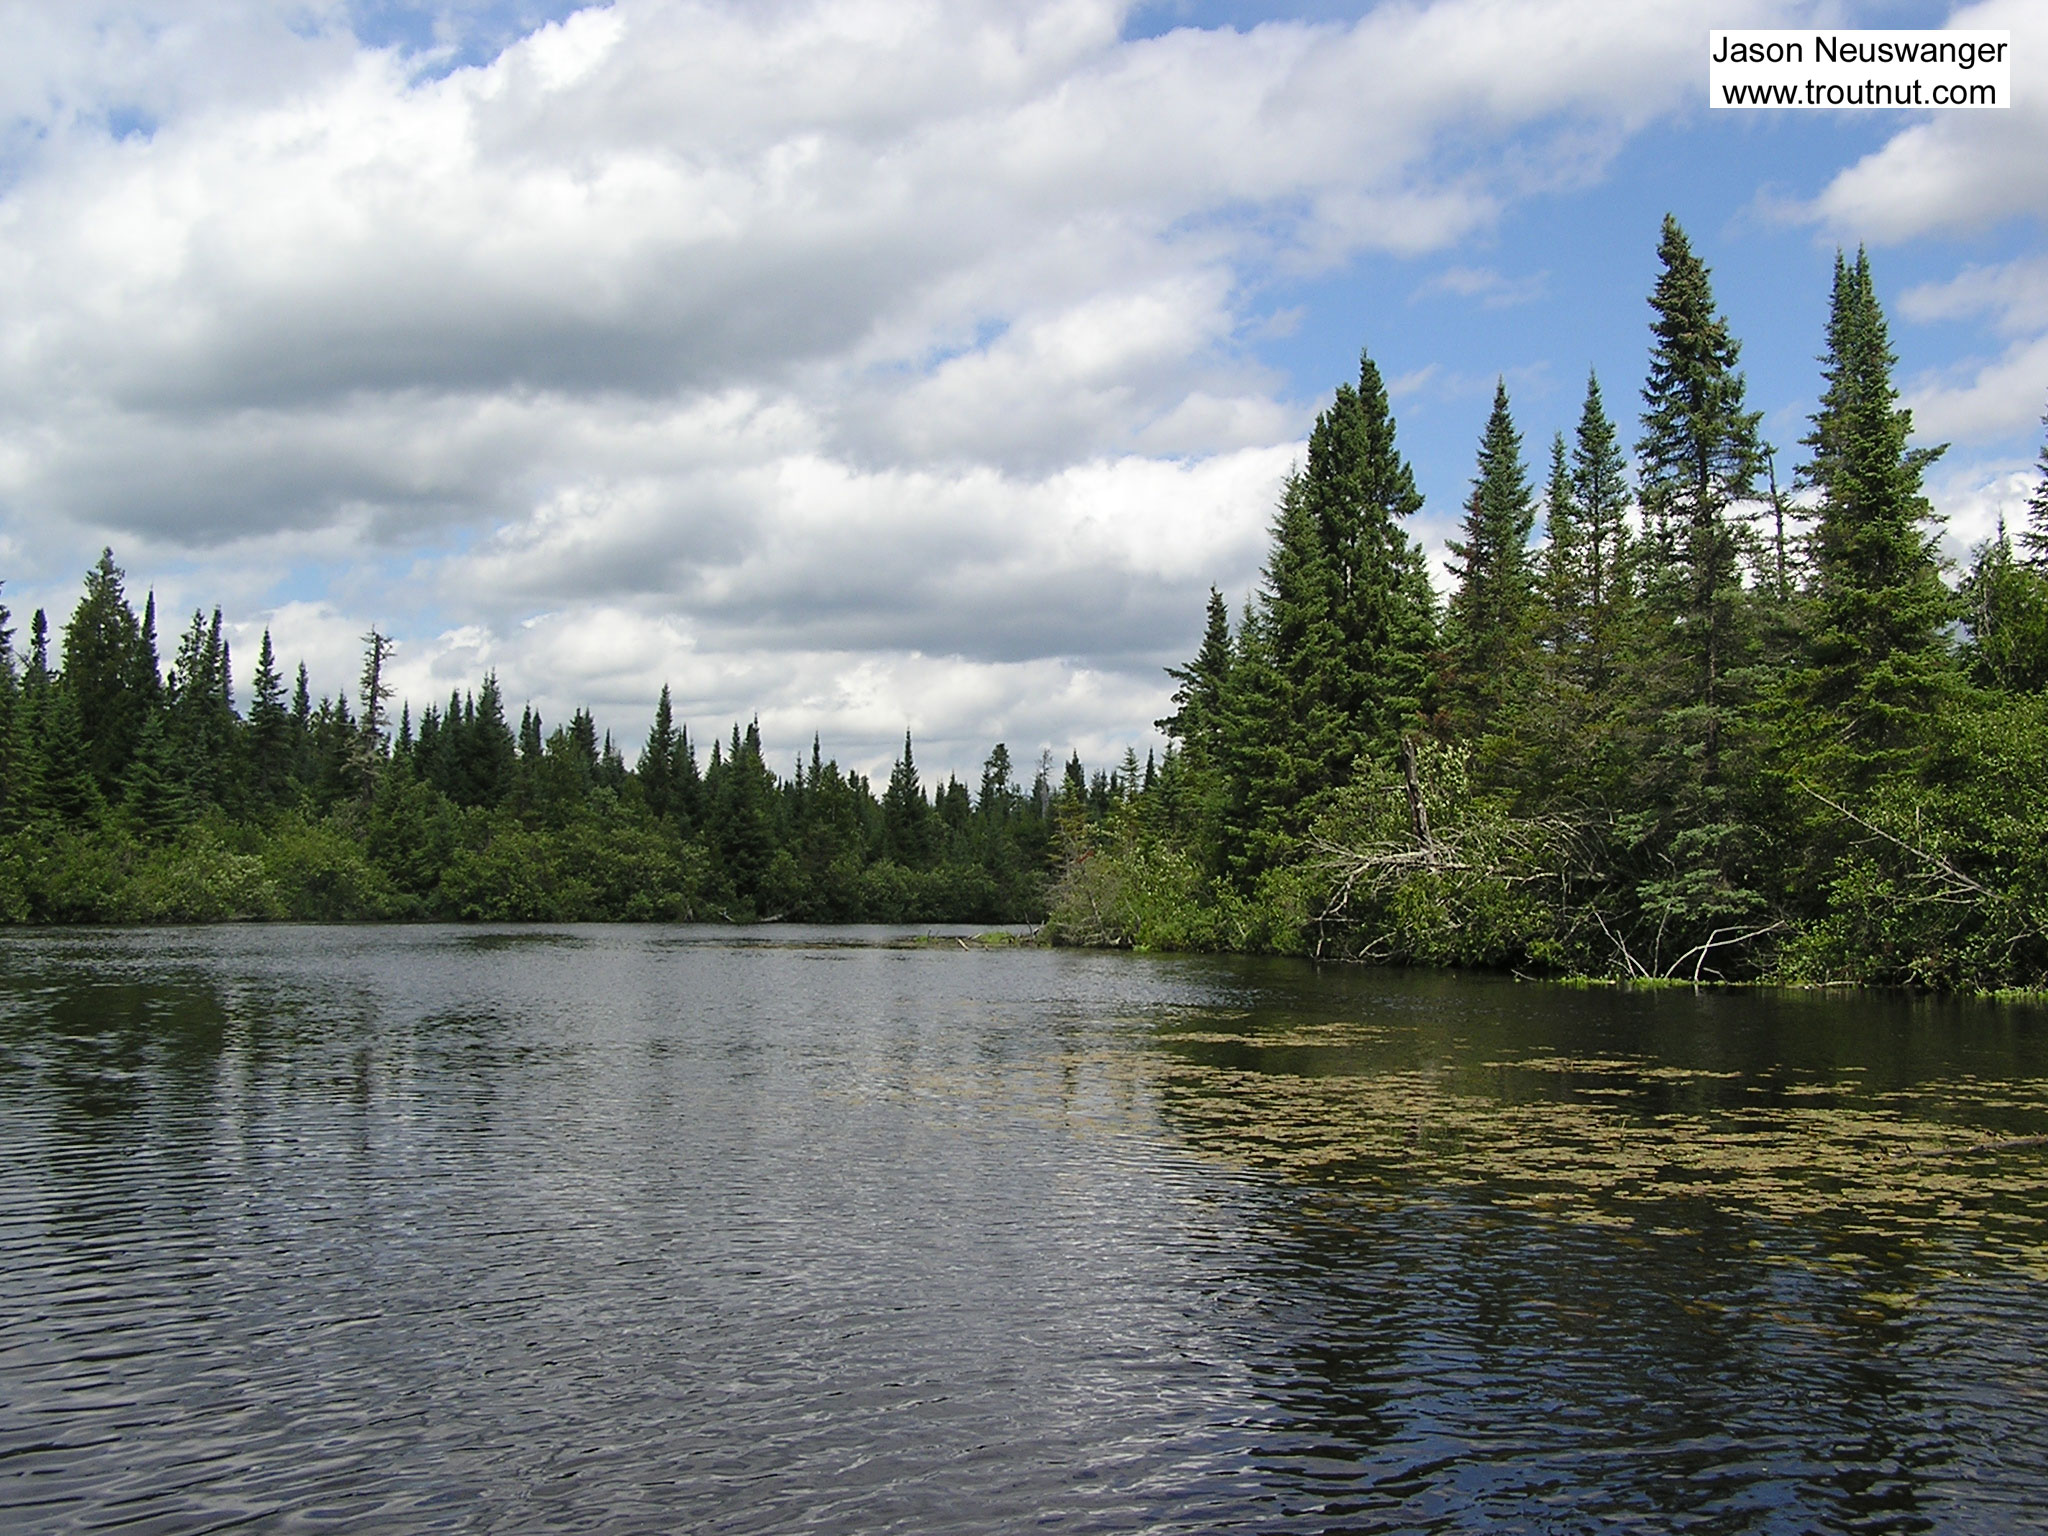 A remote, lake-like stretch of a trout river provides refuge for large, reclusive browns. From the Bois Brule River in Wisconsin.